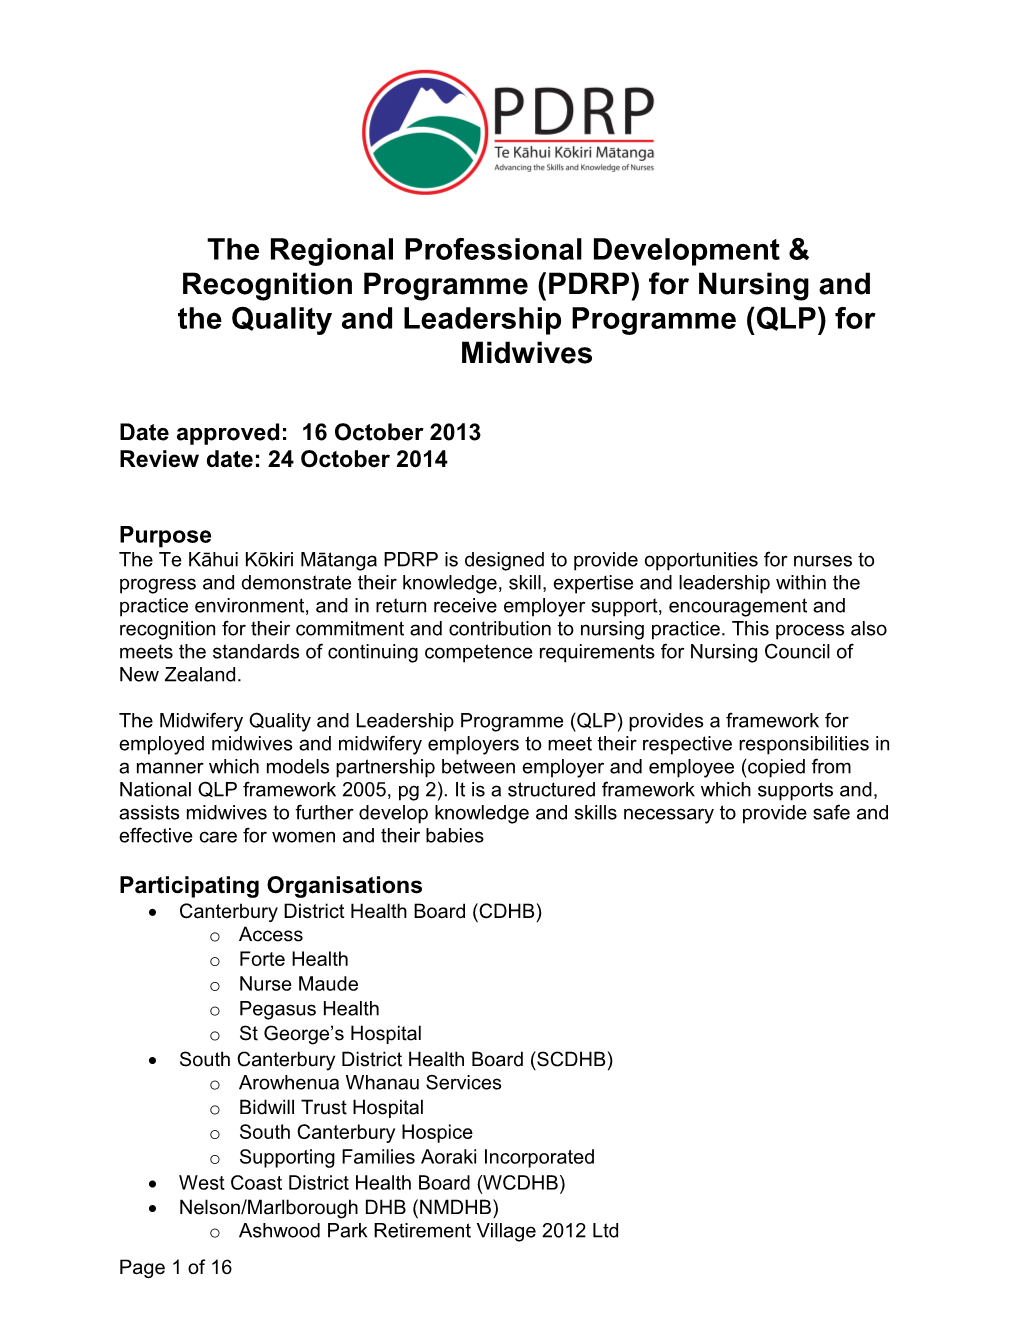 The Regional Professional Development & Recognition Programme (Pdrp) for Nursing and The